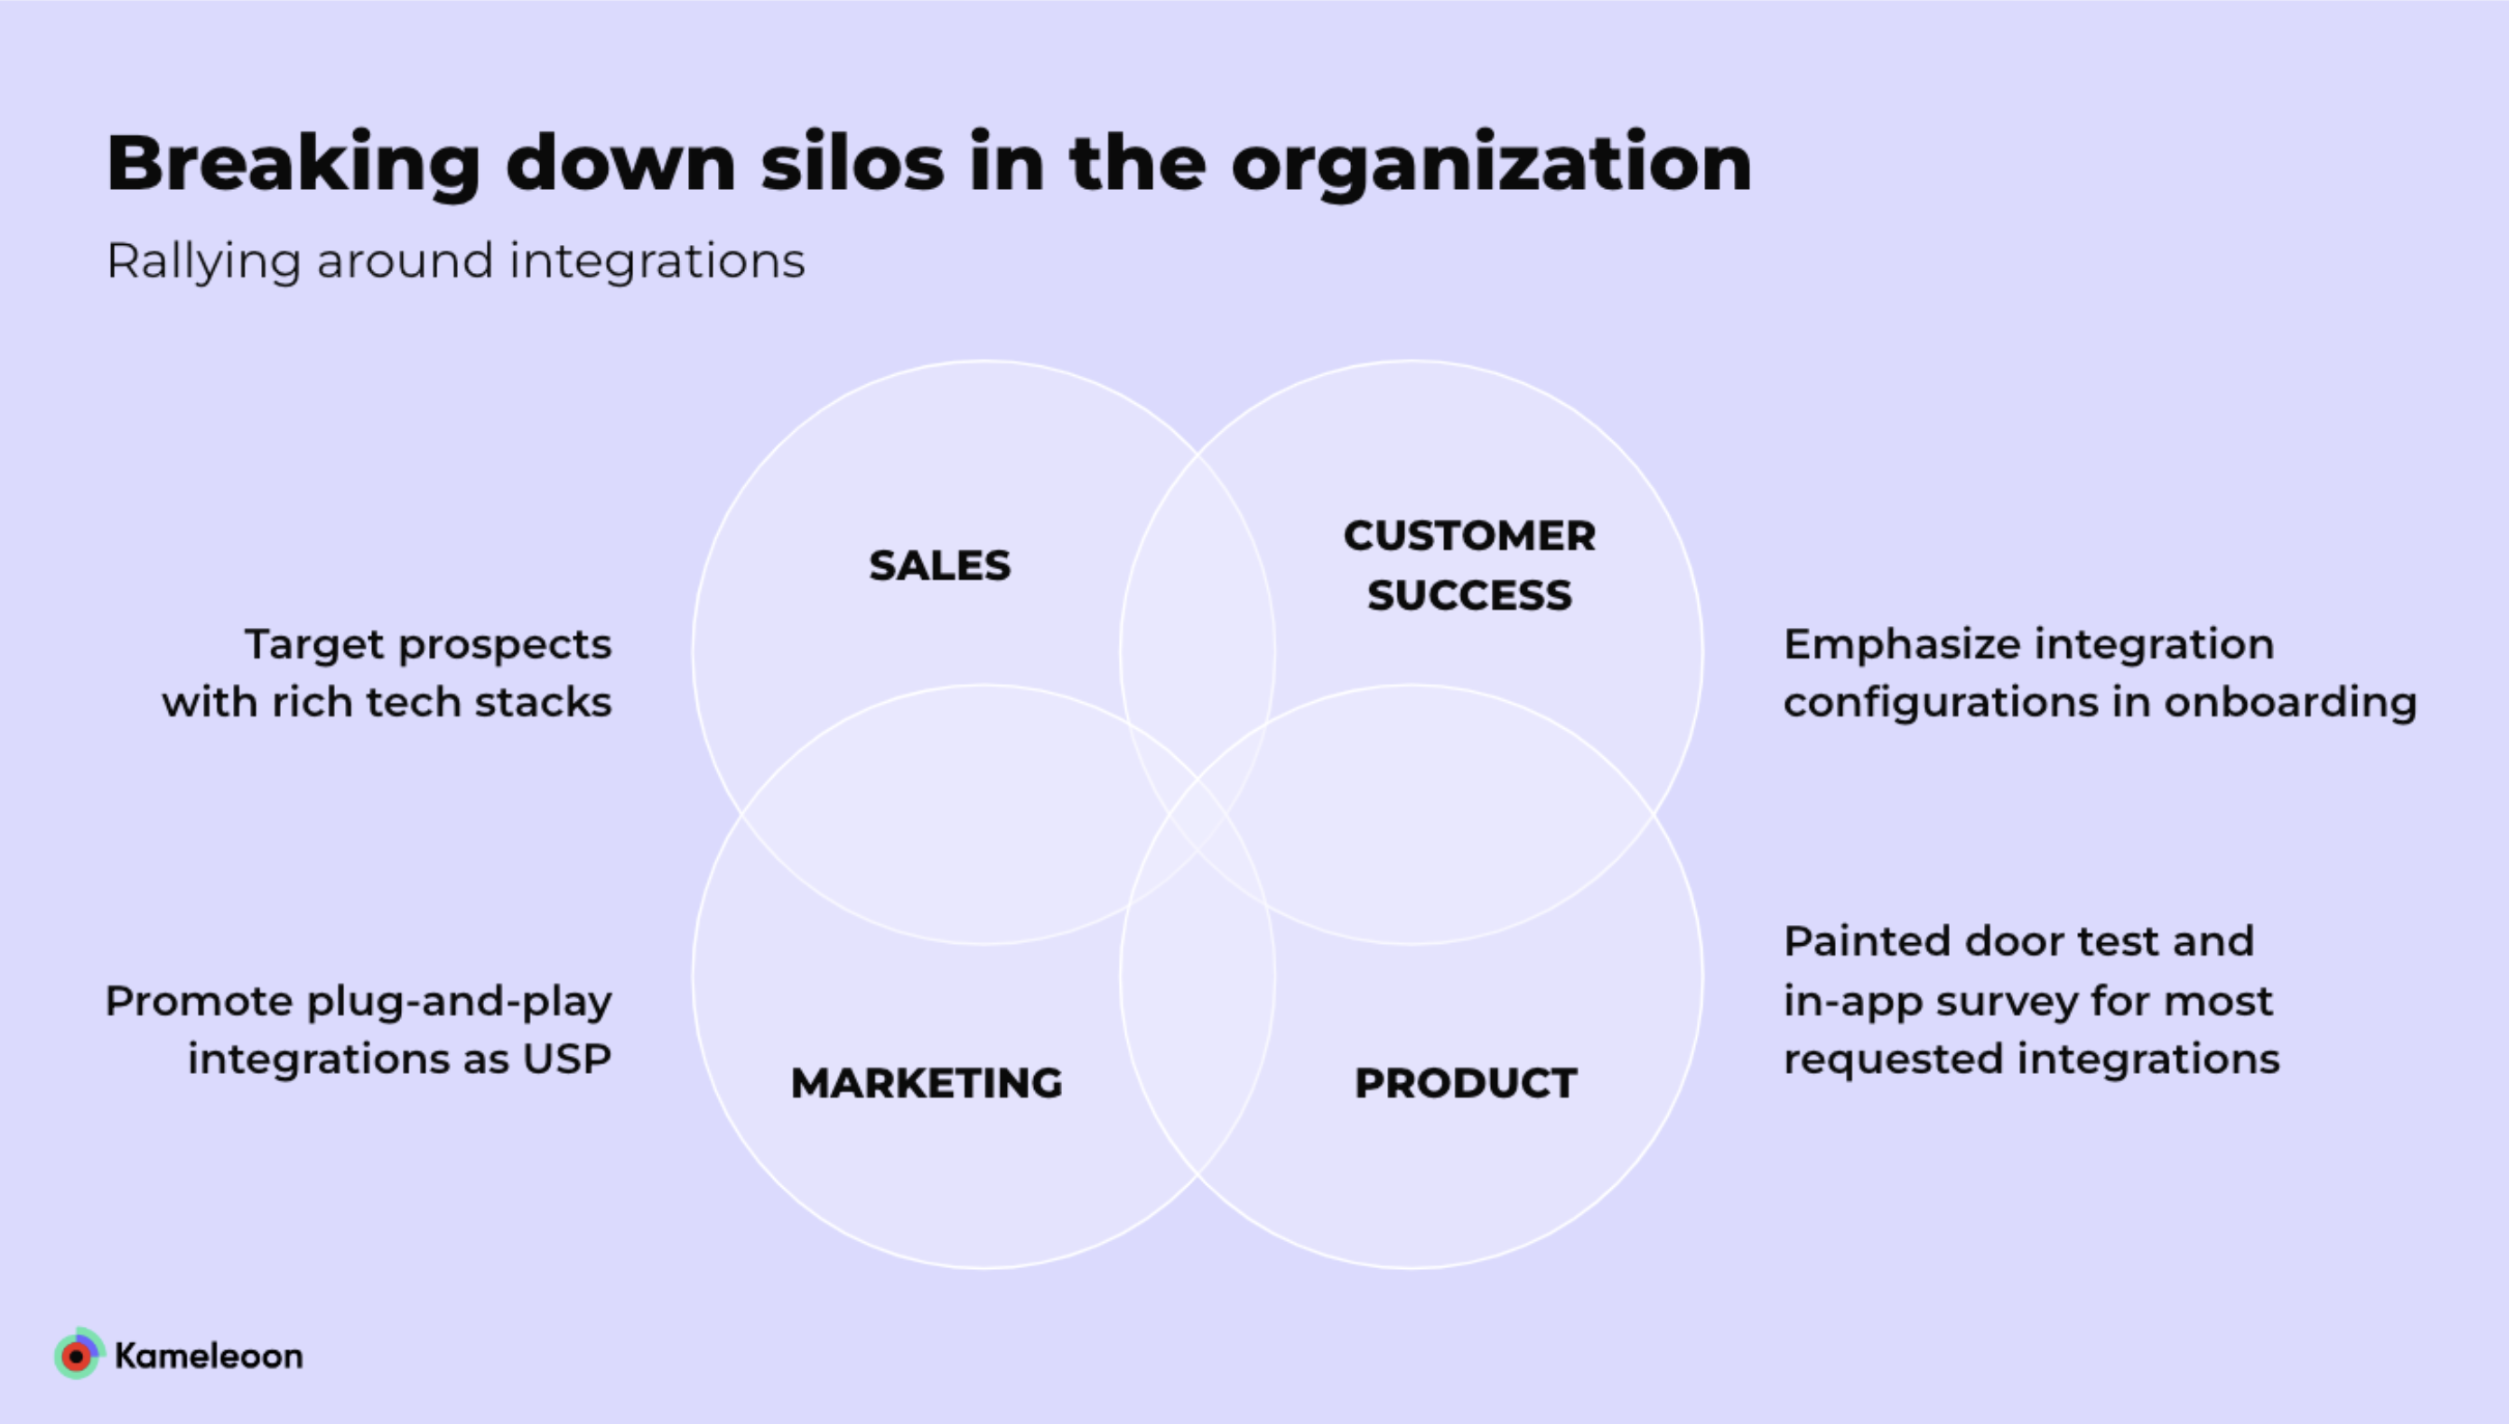 Chart showing breaking down siloes in an organization